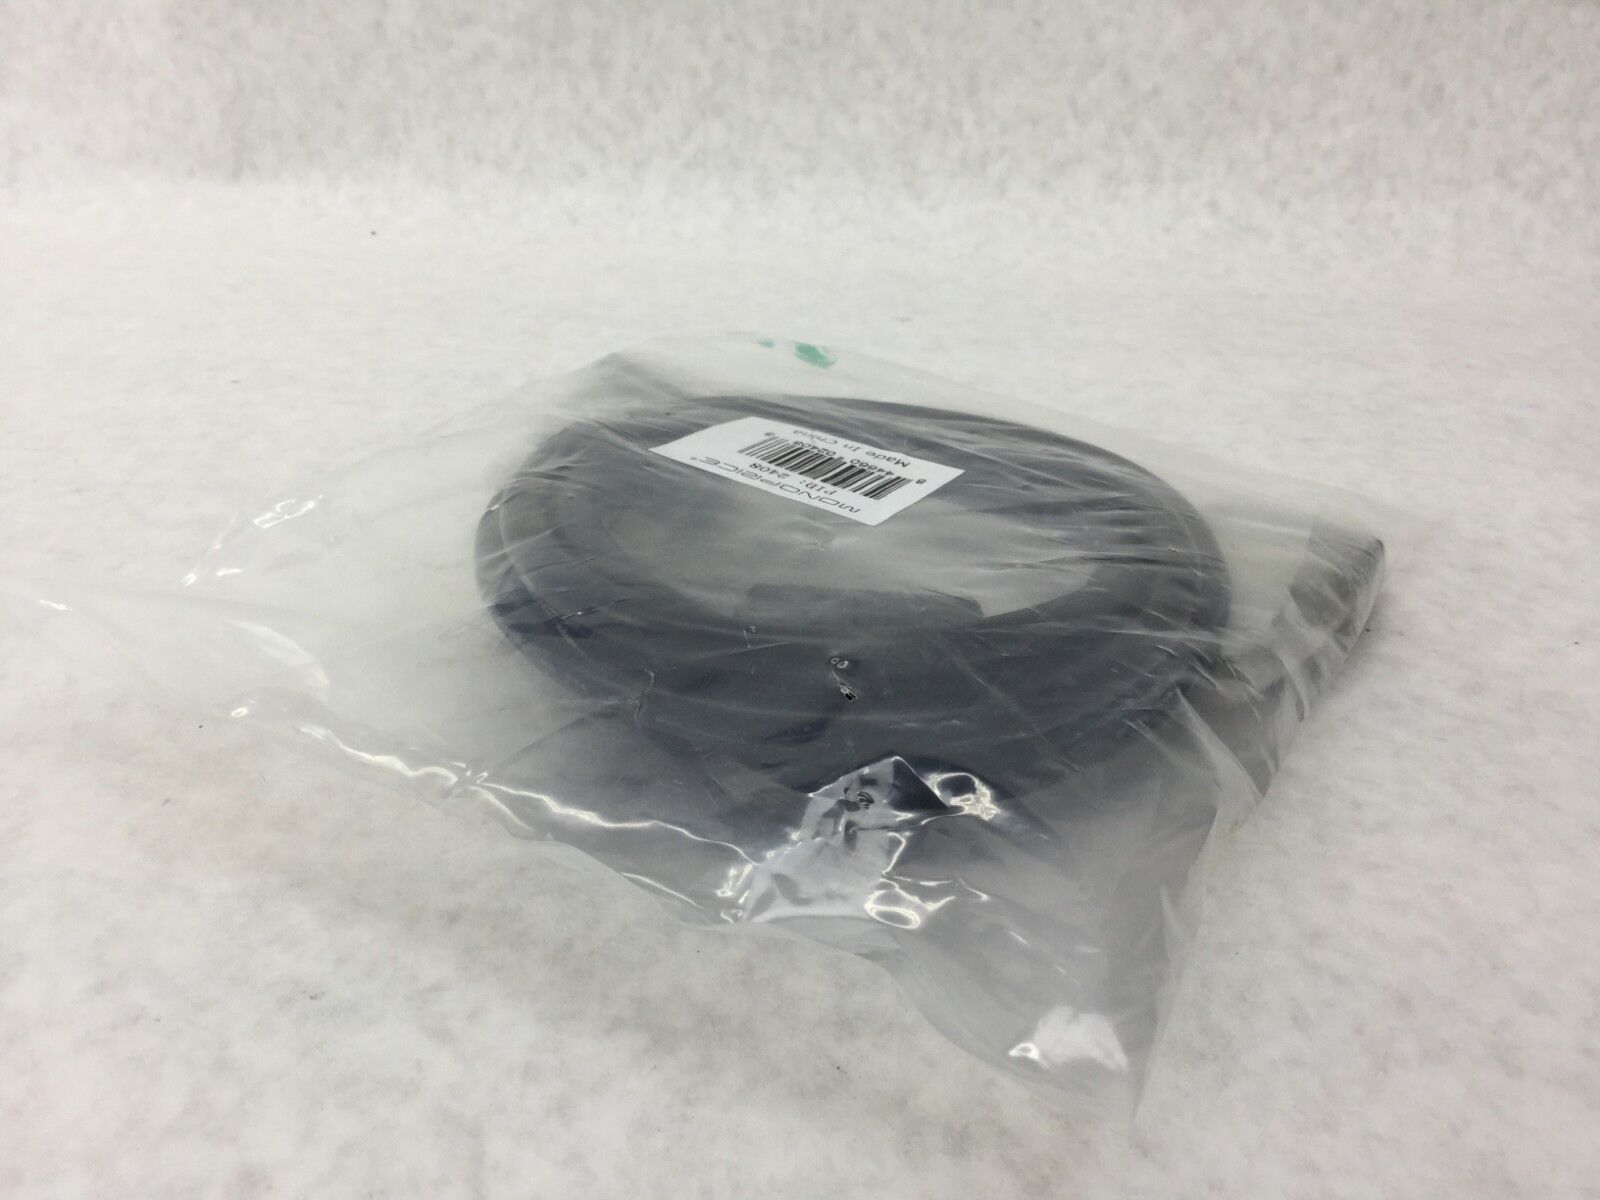 MONOPRICE 2408 Cable  NEW in Sealed Package